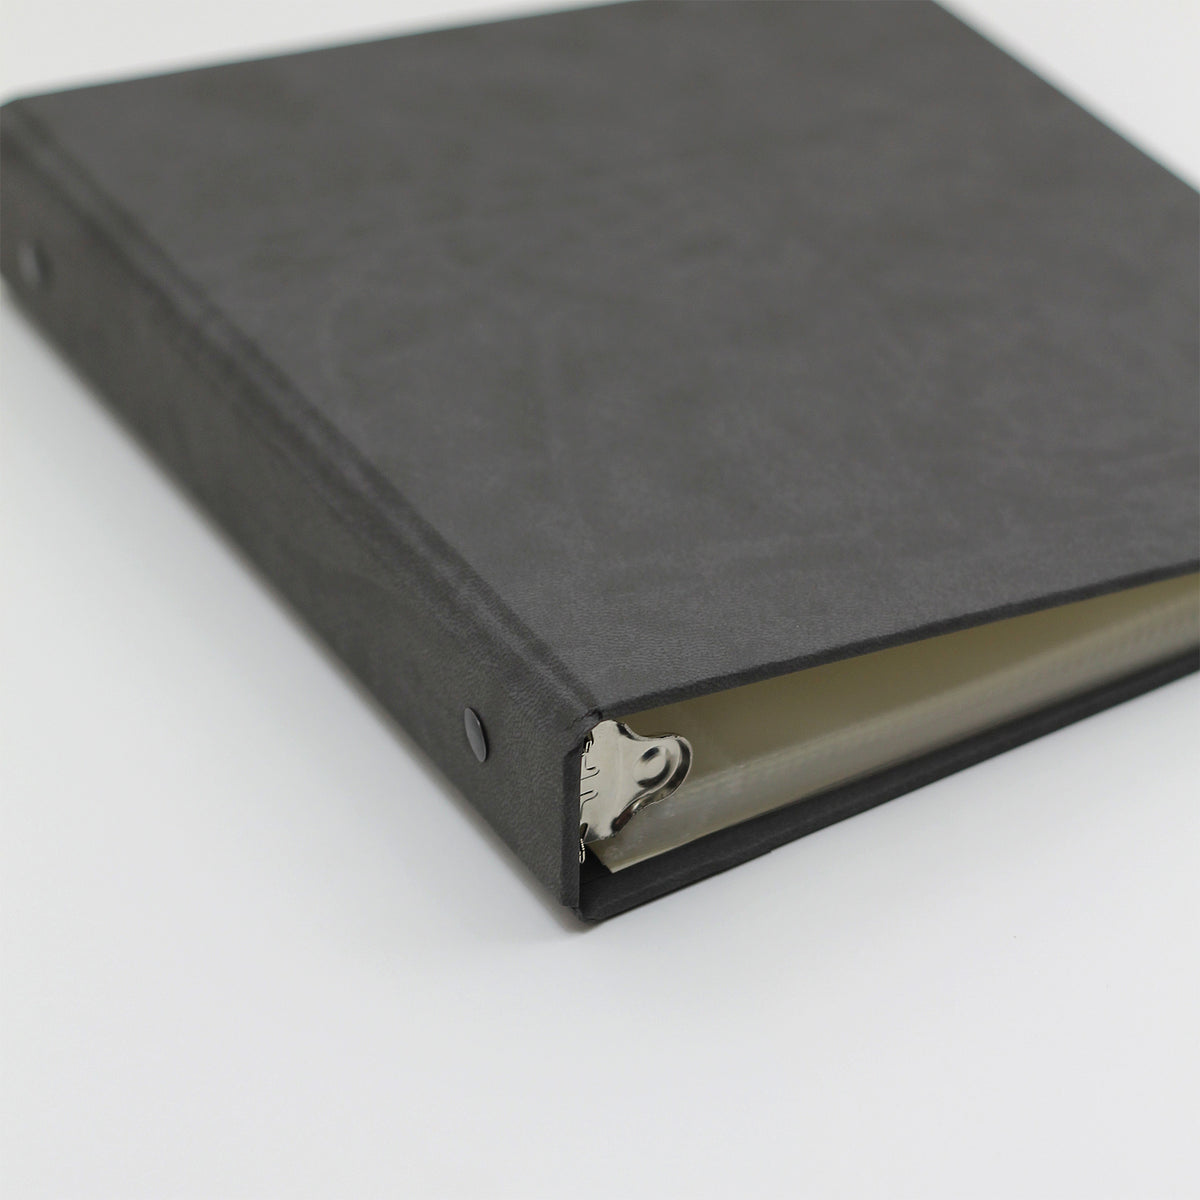 Medium Photo Binder For 4x6 Photos | Cover: Slate Vegan Leather | Available Personalized